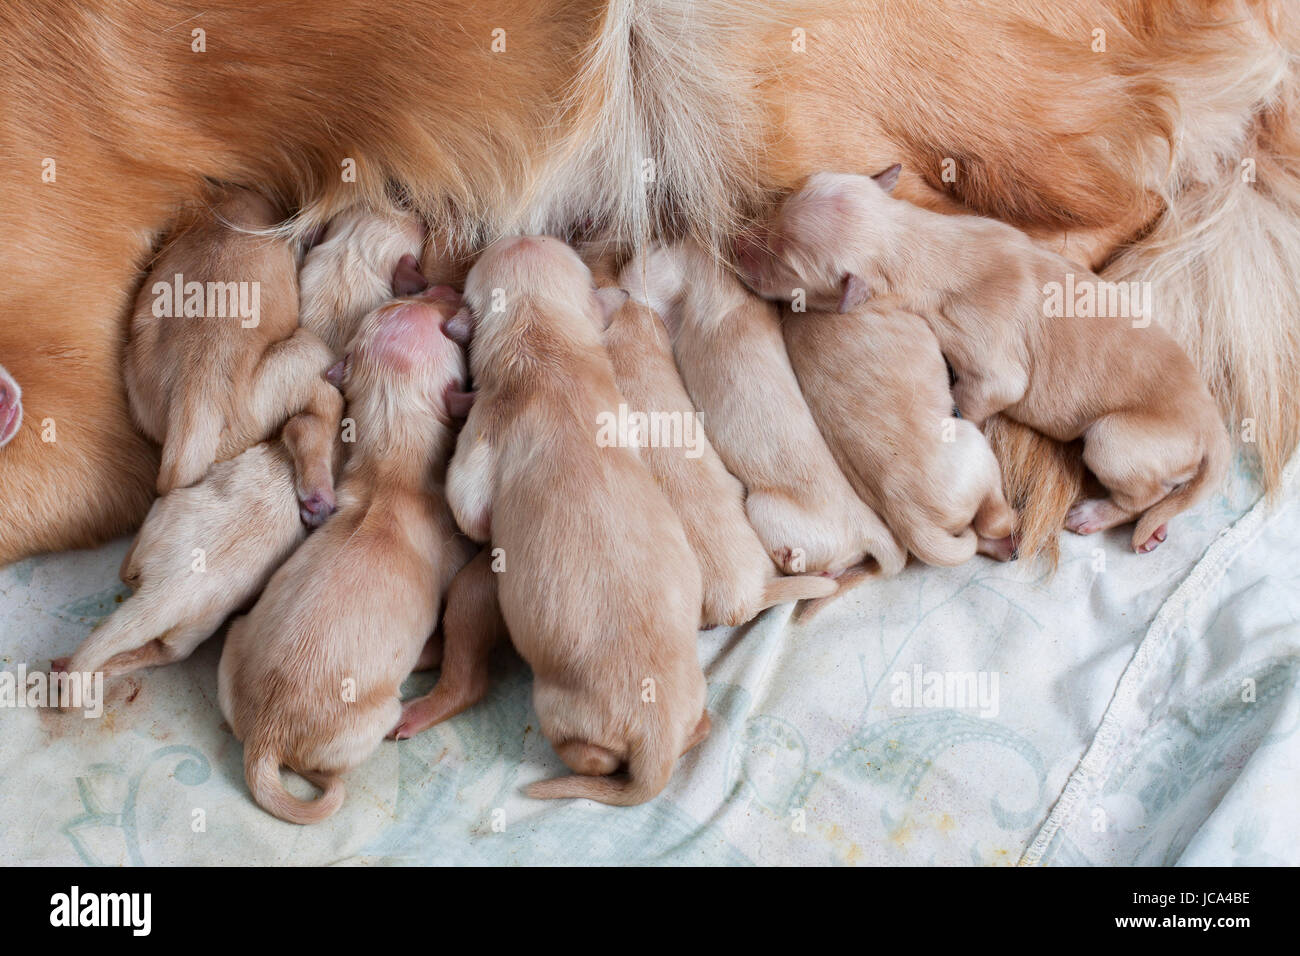 first day new born of golden retriever puppy dog lying beside her mom Stock  Photo - Alamy